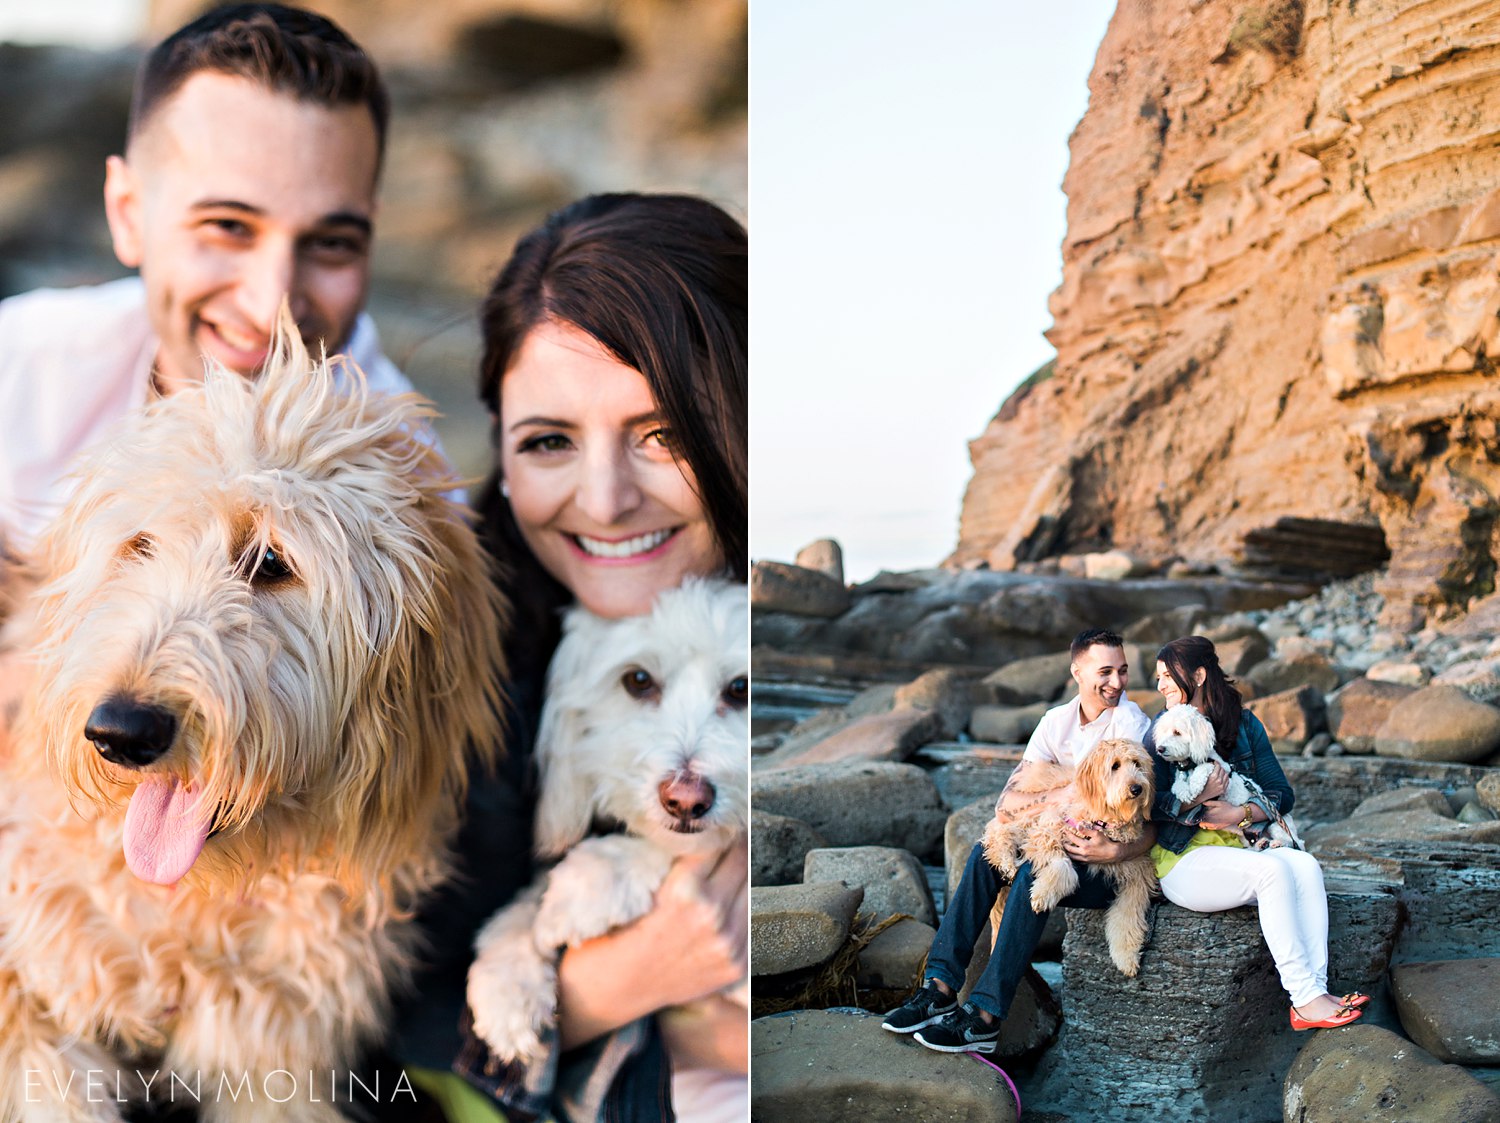 Sunset Cliffs Engagement Session - Carly and Alex - Evelyn Molina Photography_0021.jpg